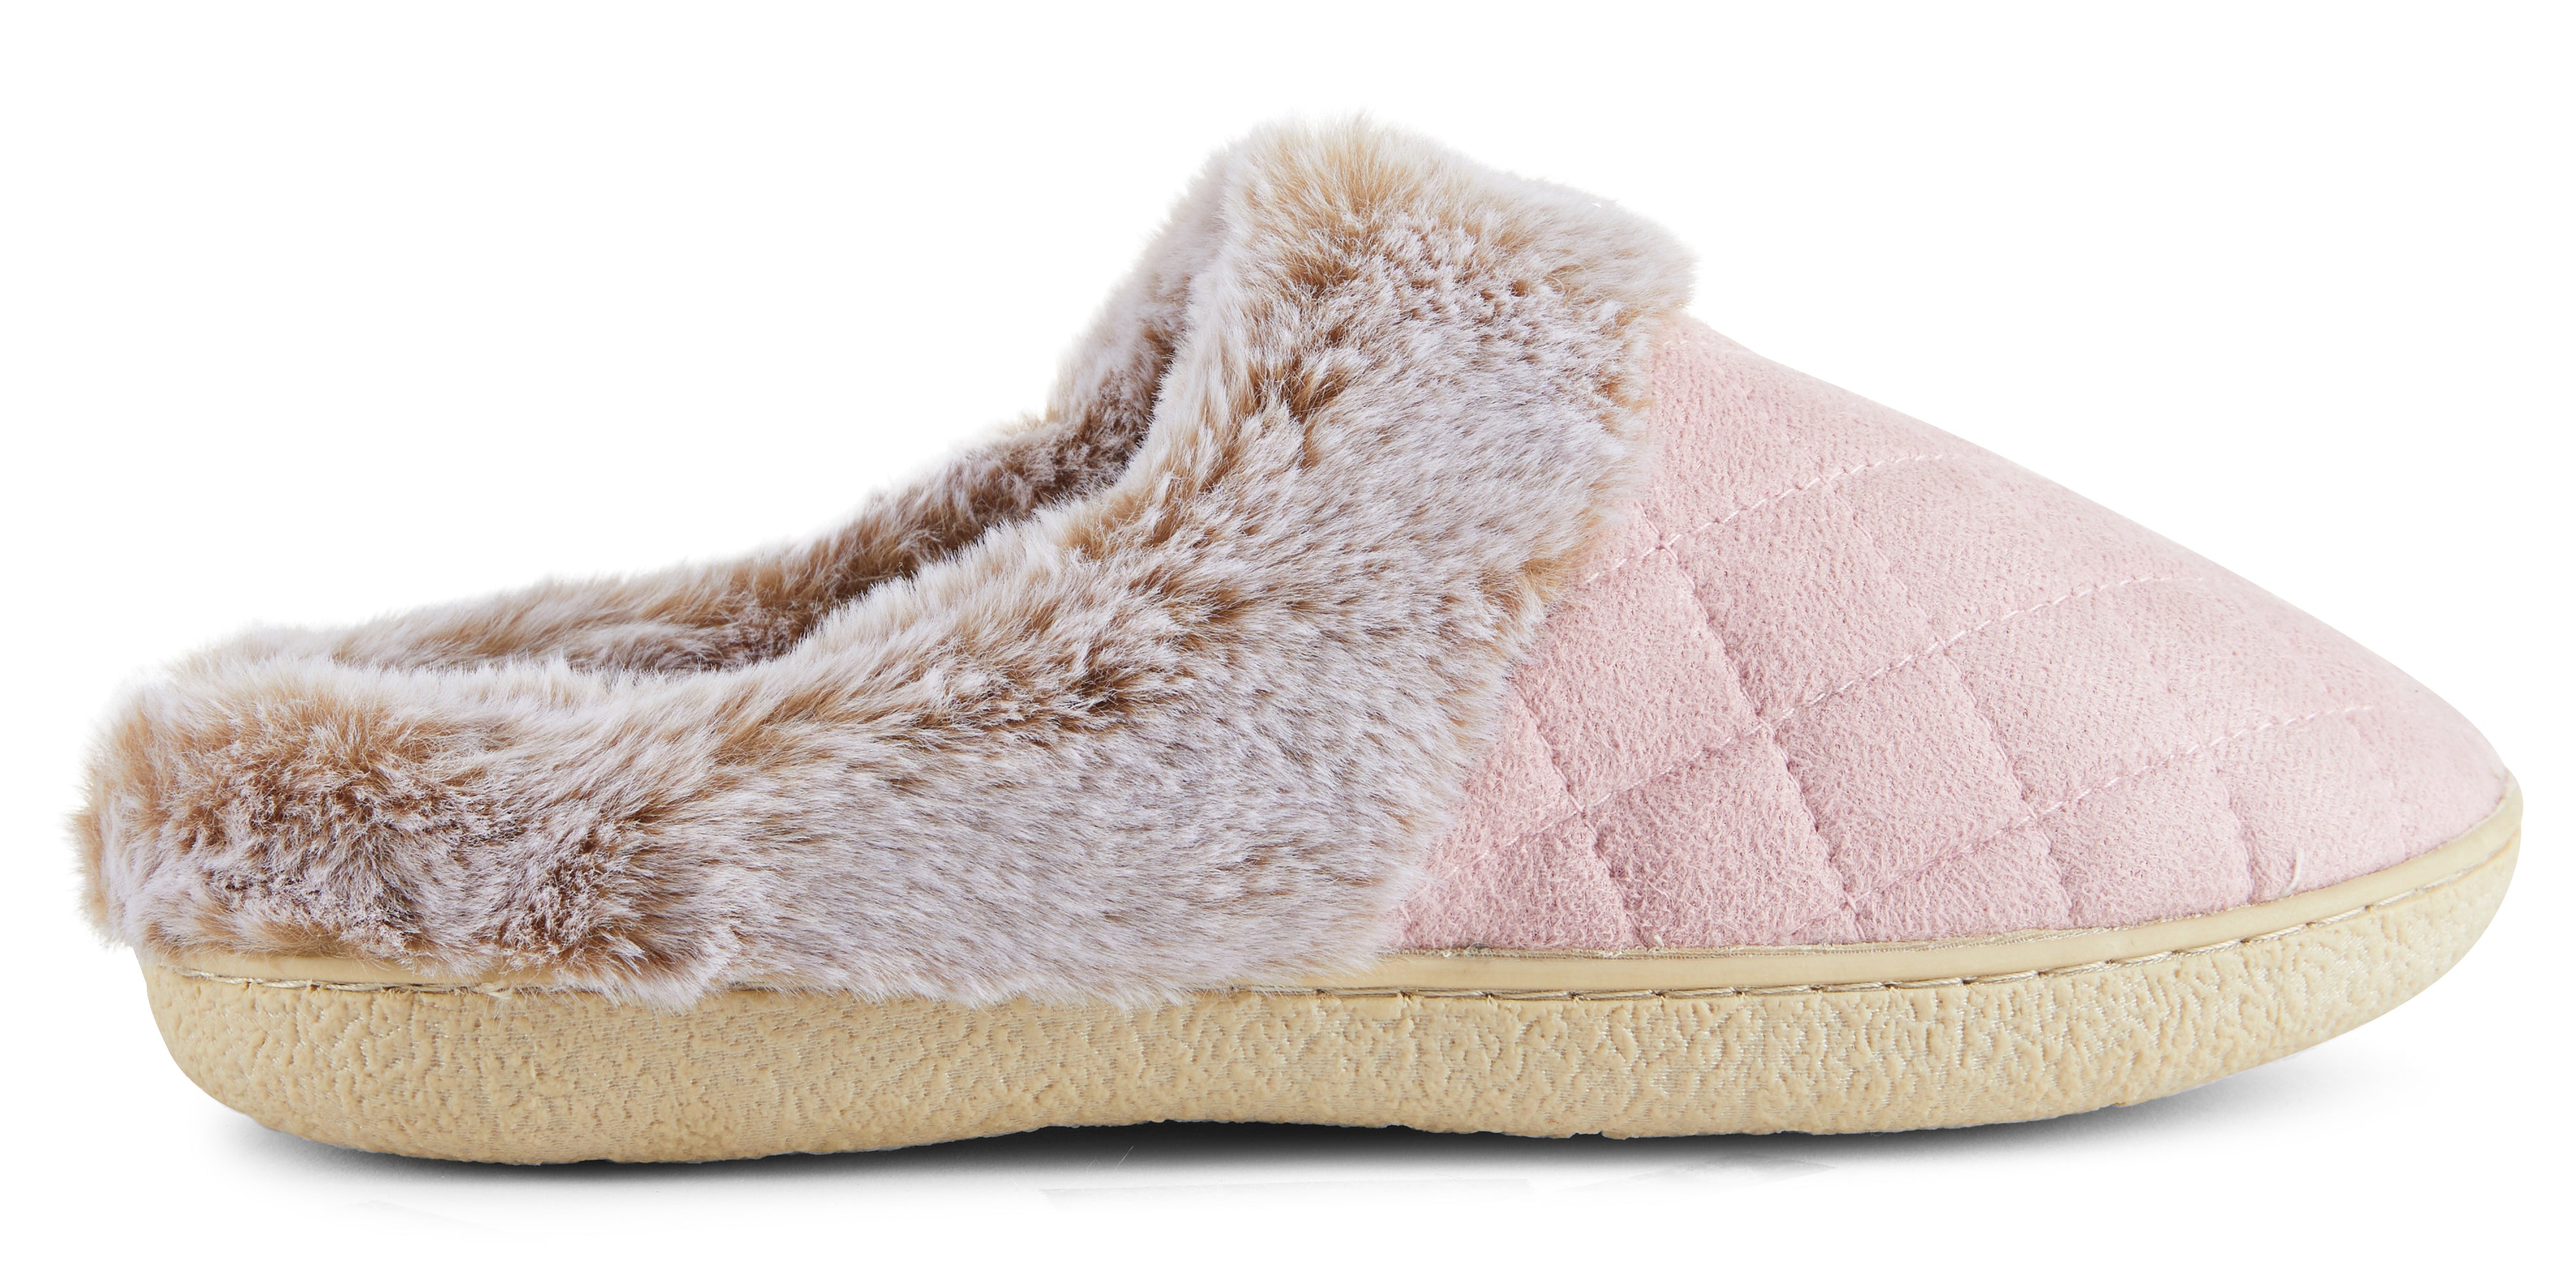 Womens Soft Quilted Indoor/Outdoor Two-Tone Faux Fur Clog Slipper - Pink